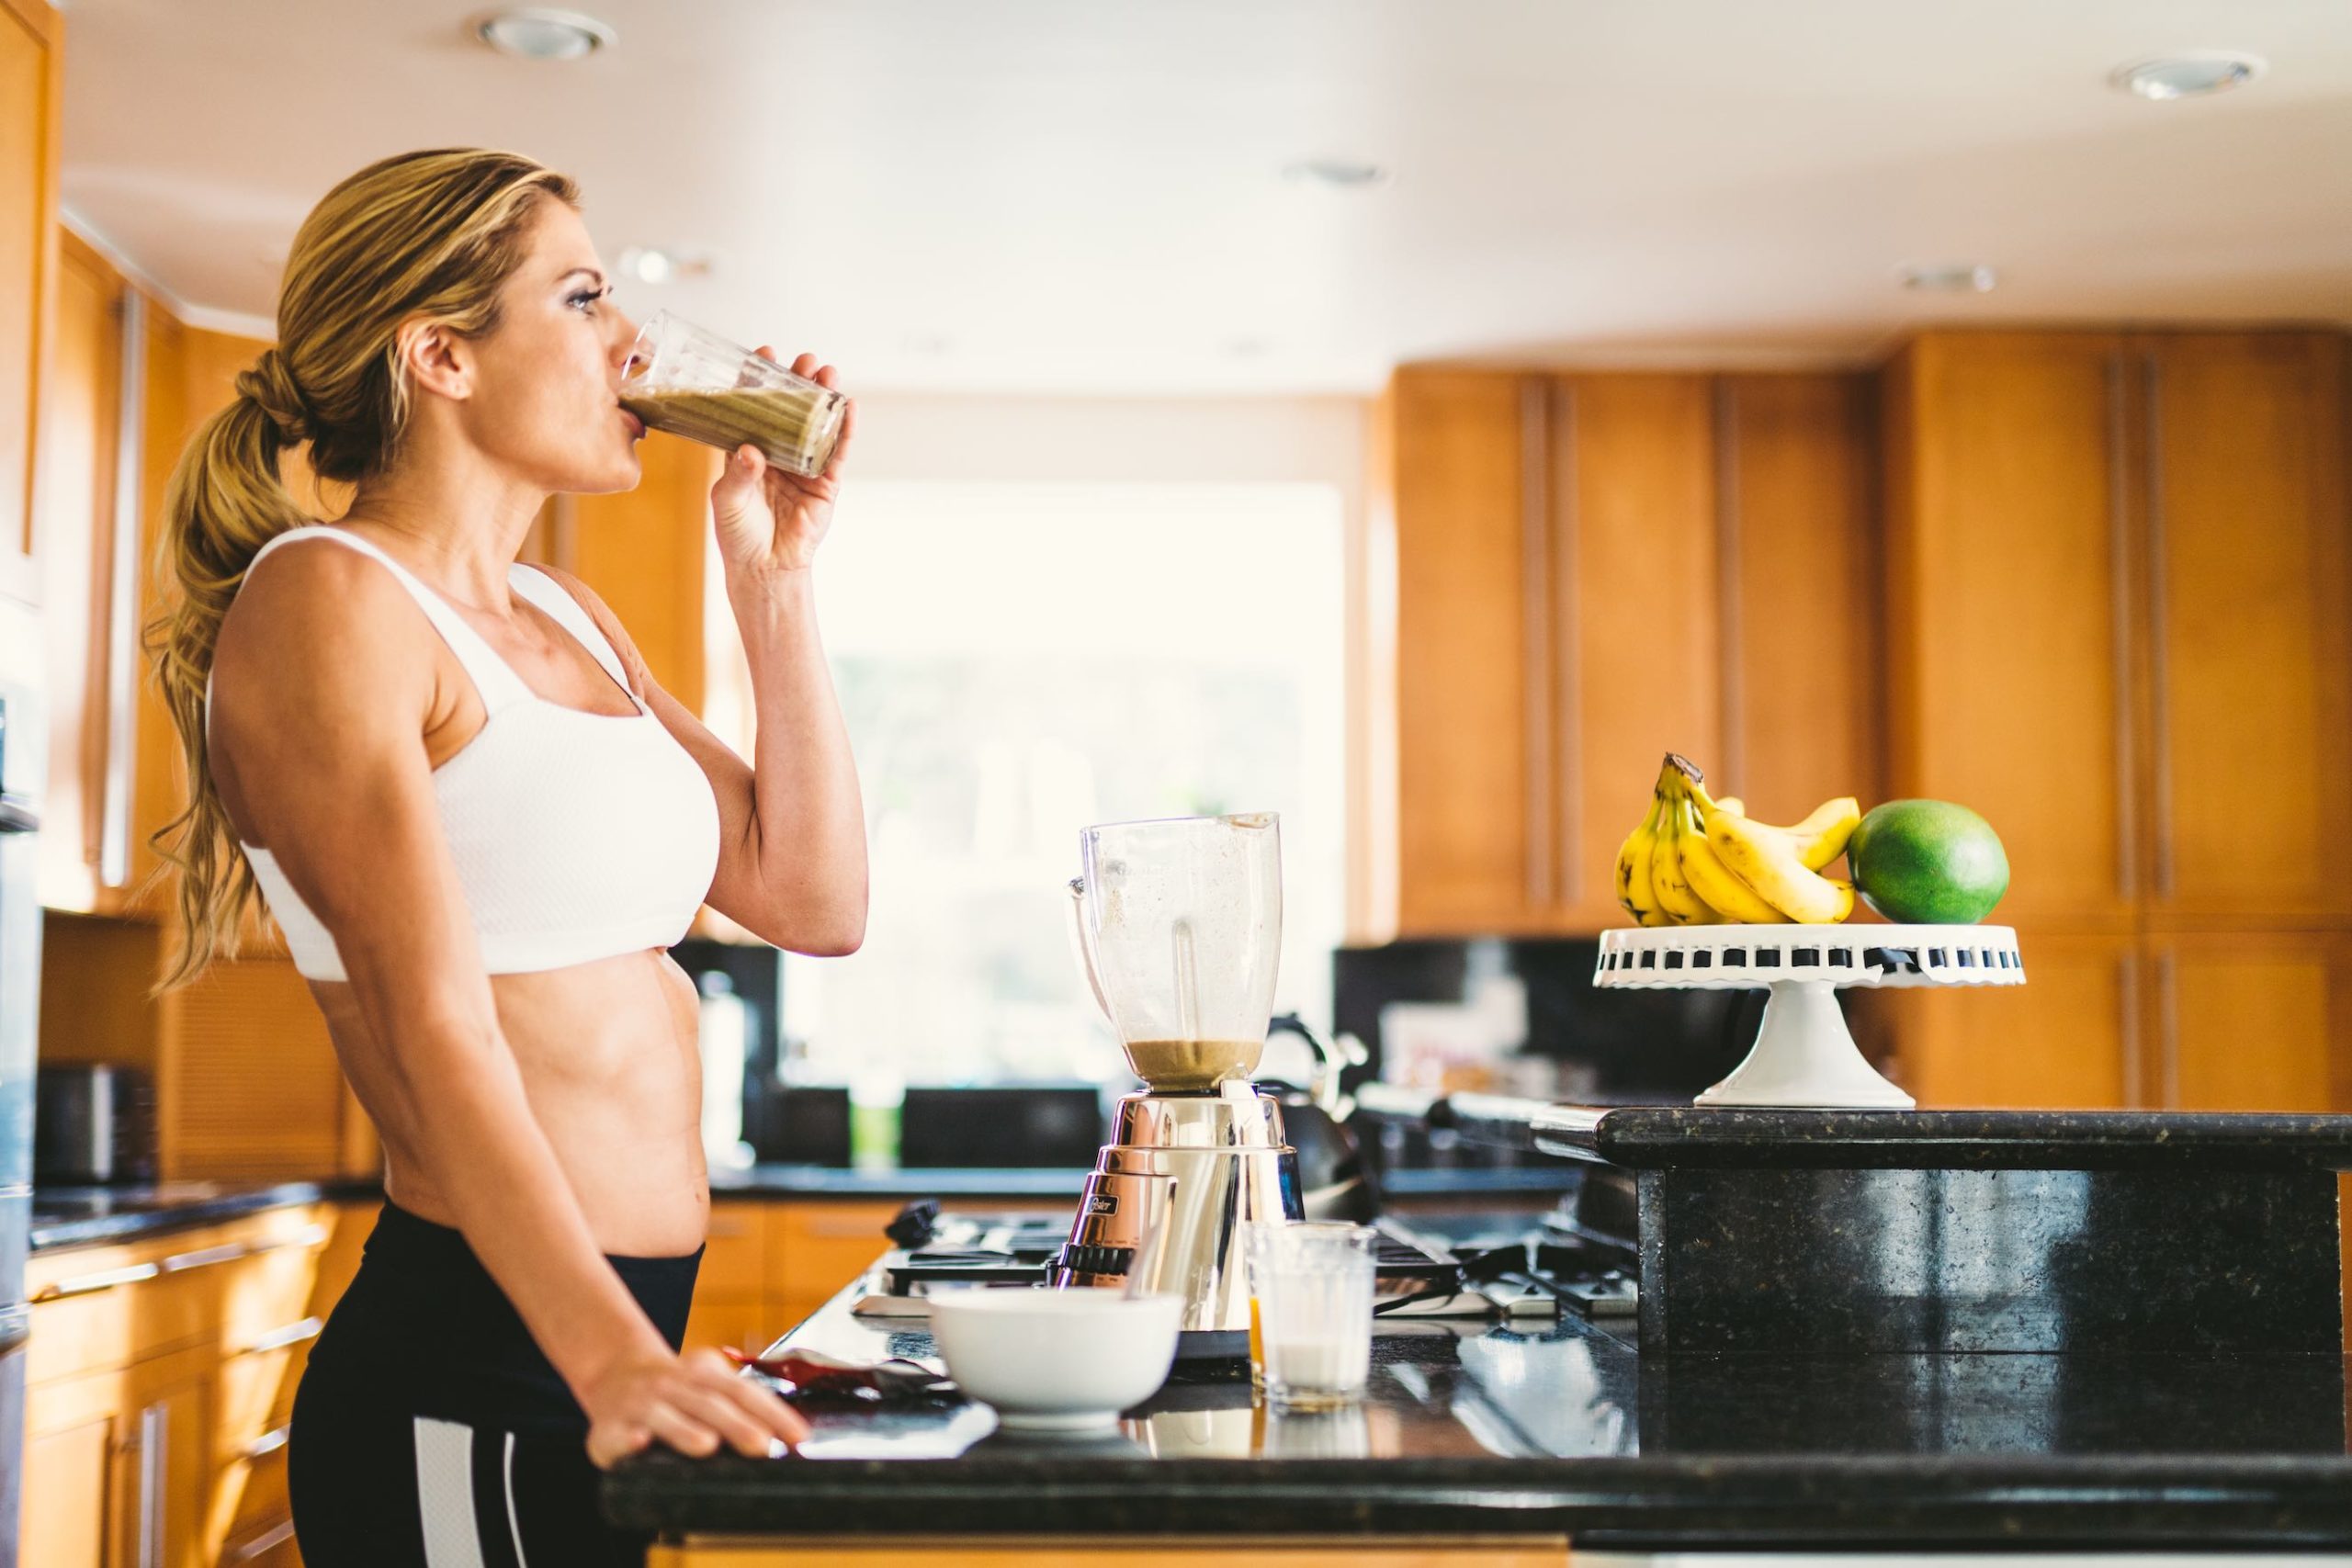 CBD Product Photography Side profile of woman wearing white sports bra and black pants drinking a smoothie in a kitchen by a mixer on a counter